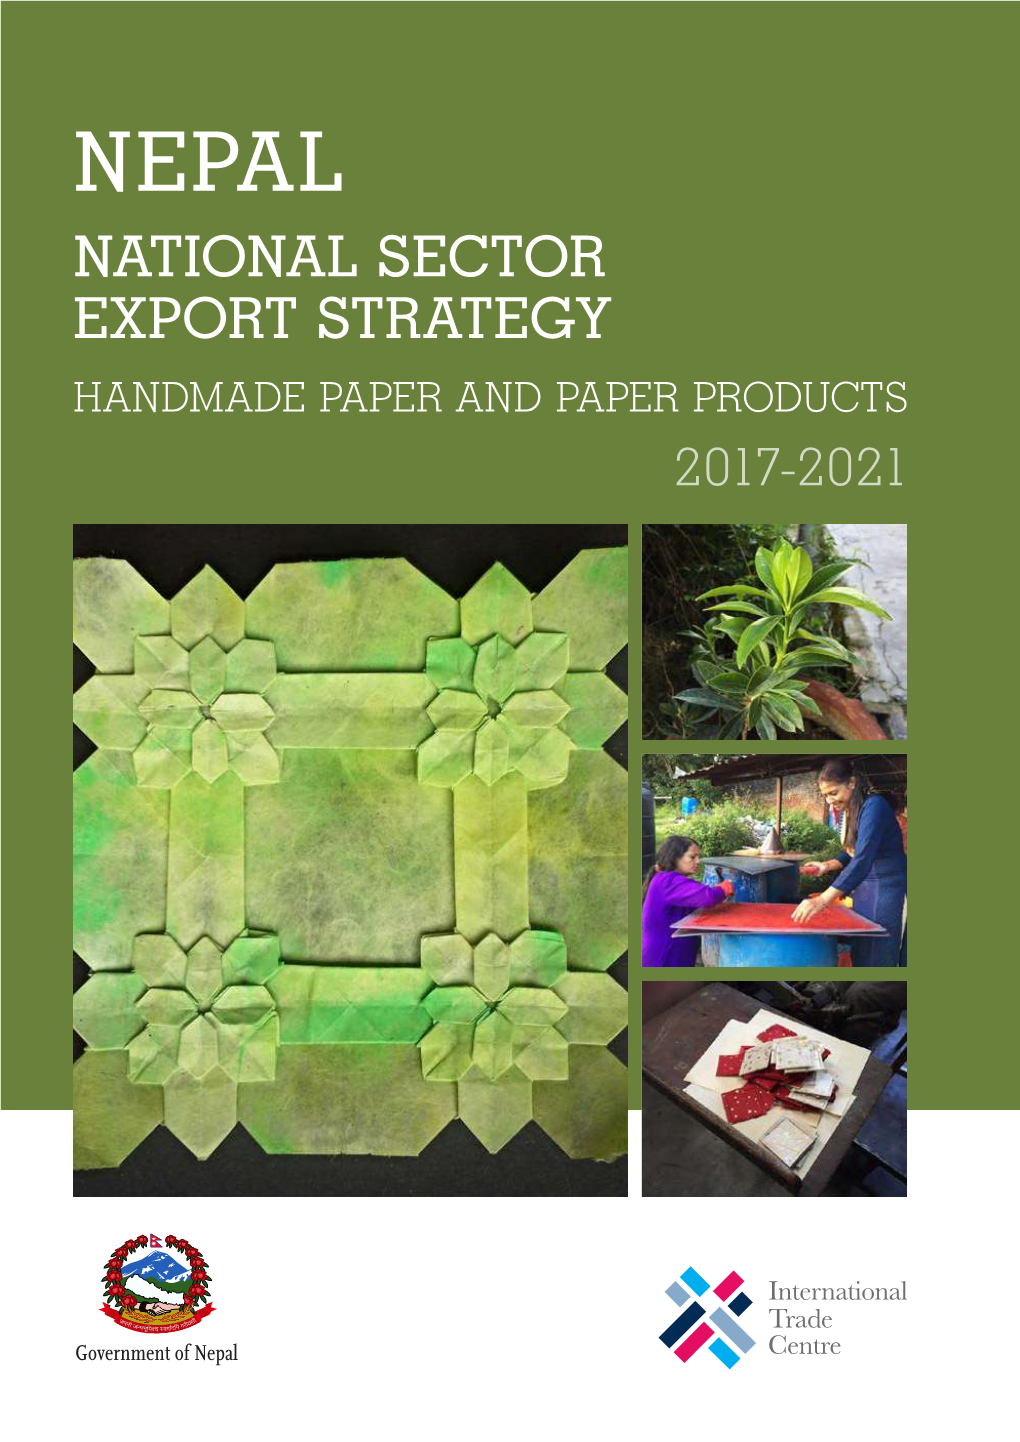 Handmade Paper and Paper Products 2017-2021